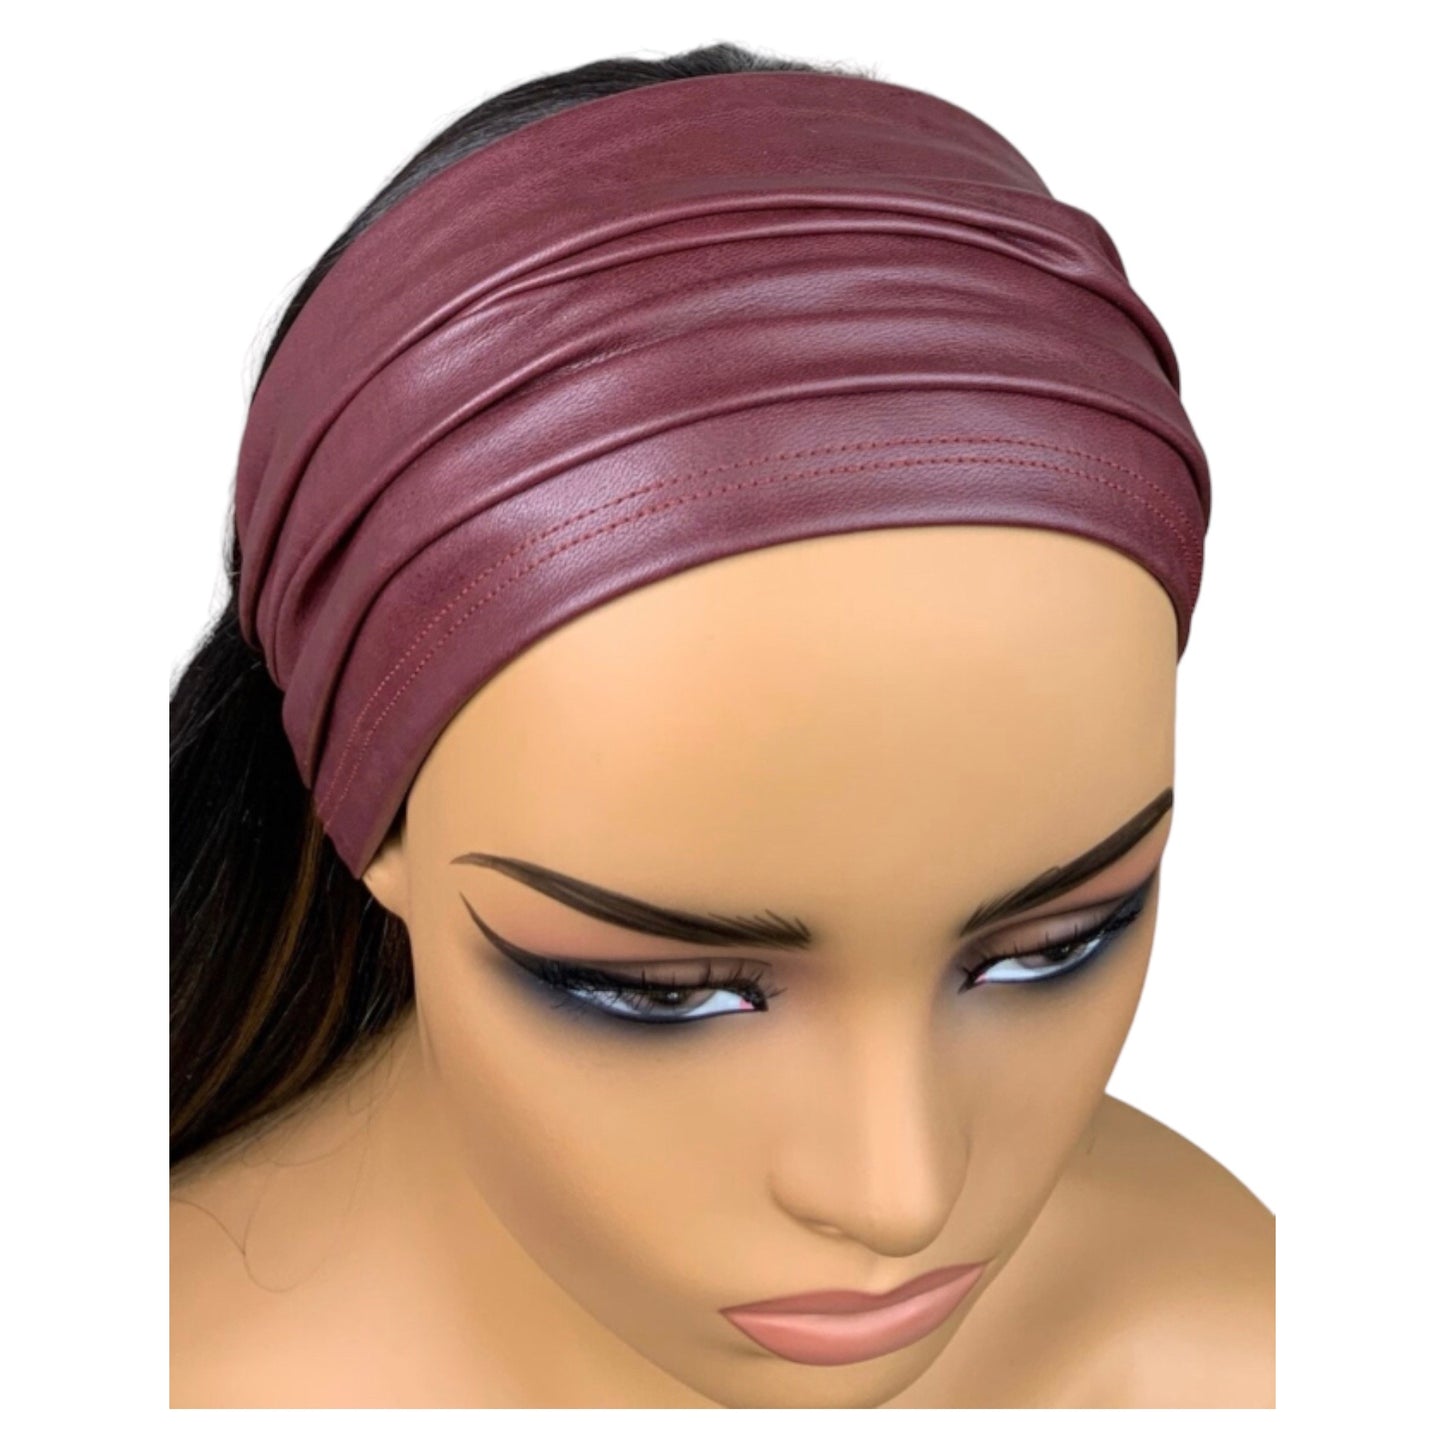 Burgundy Red Faux Leather Wide Scrunch Headband